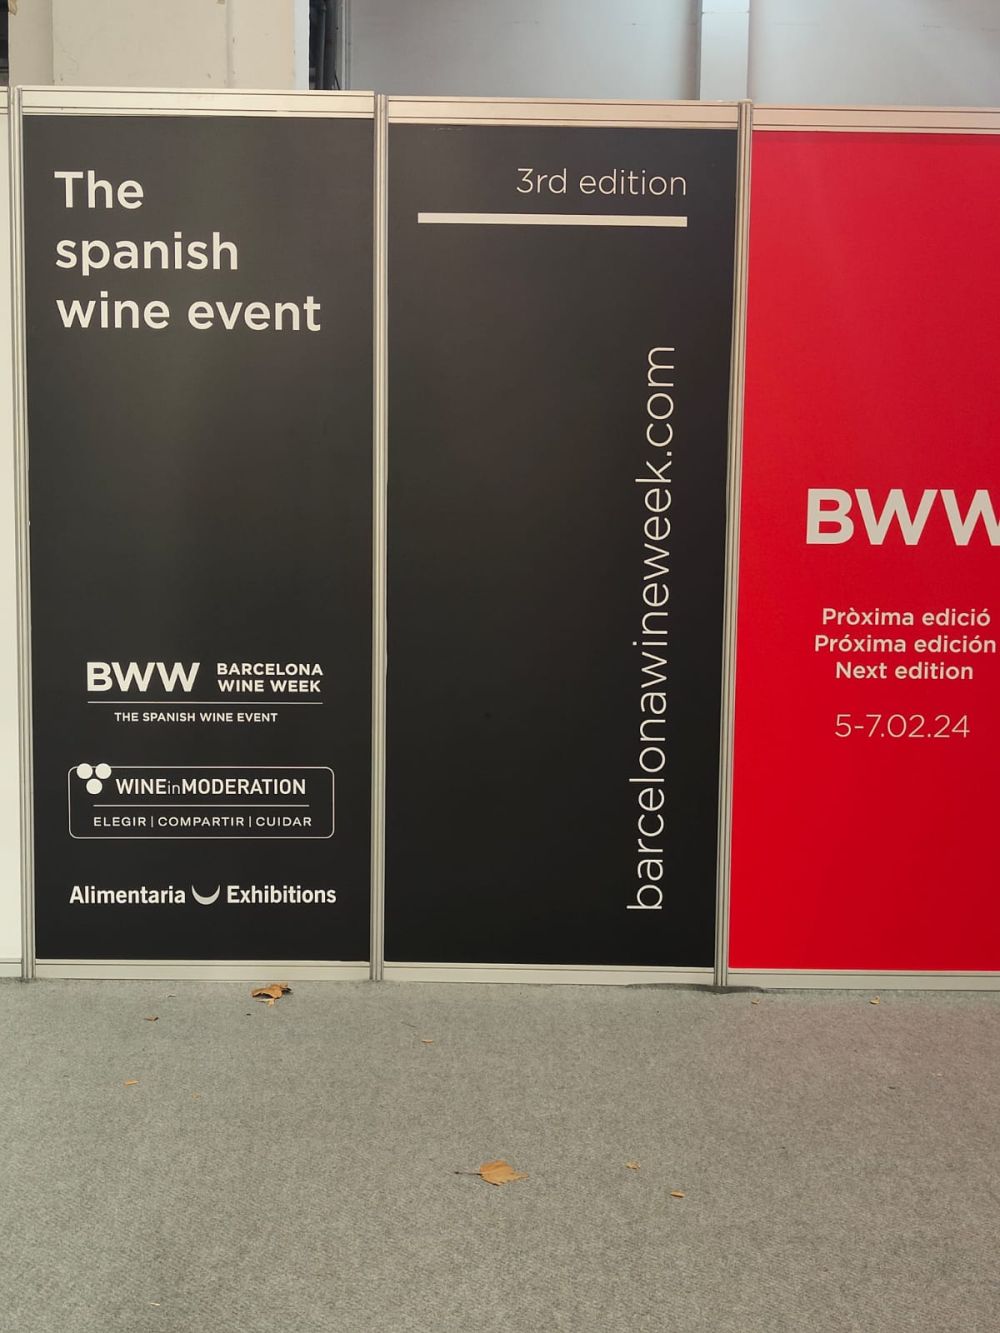 Barcelona Wine Week goes all in with Wine in Moderation 